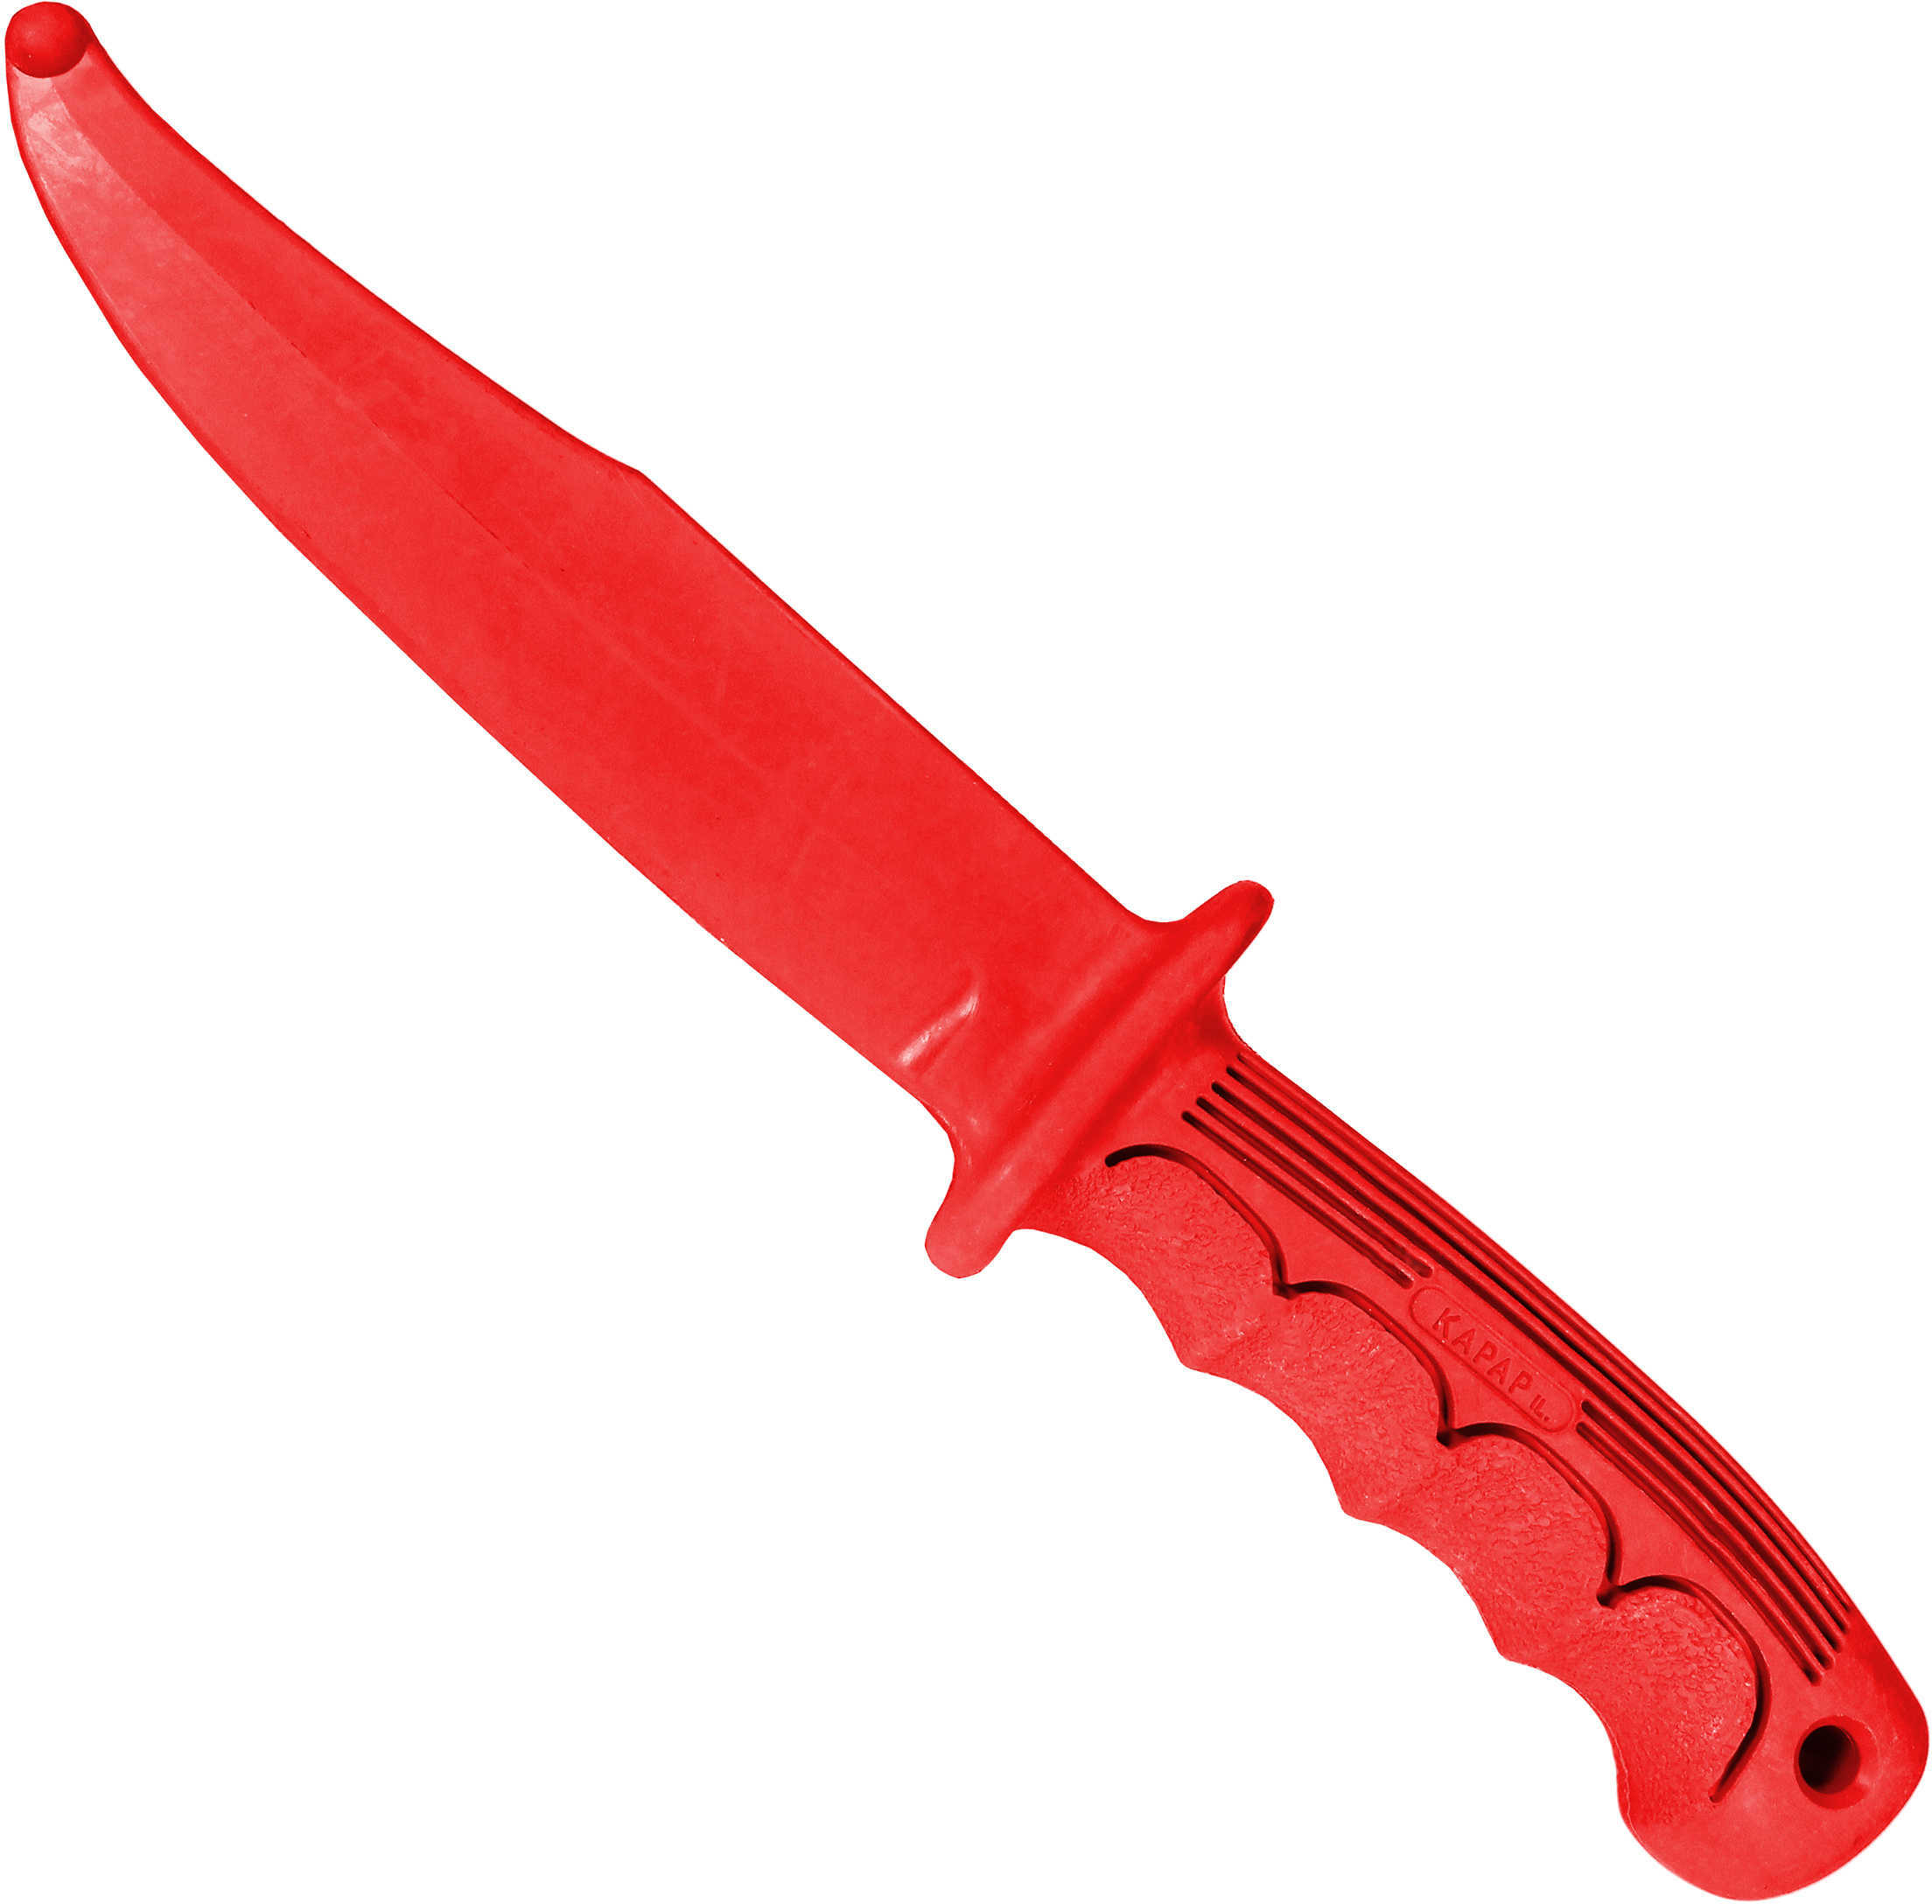 Polymer Training Knife Red